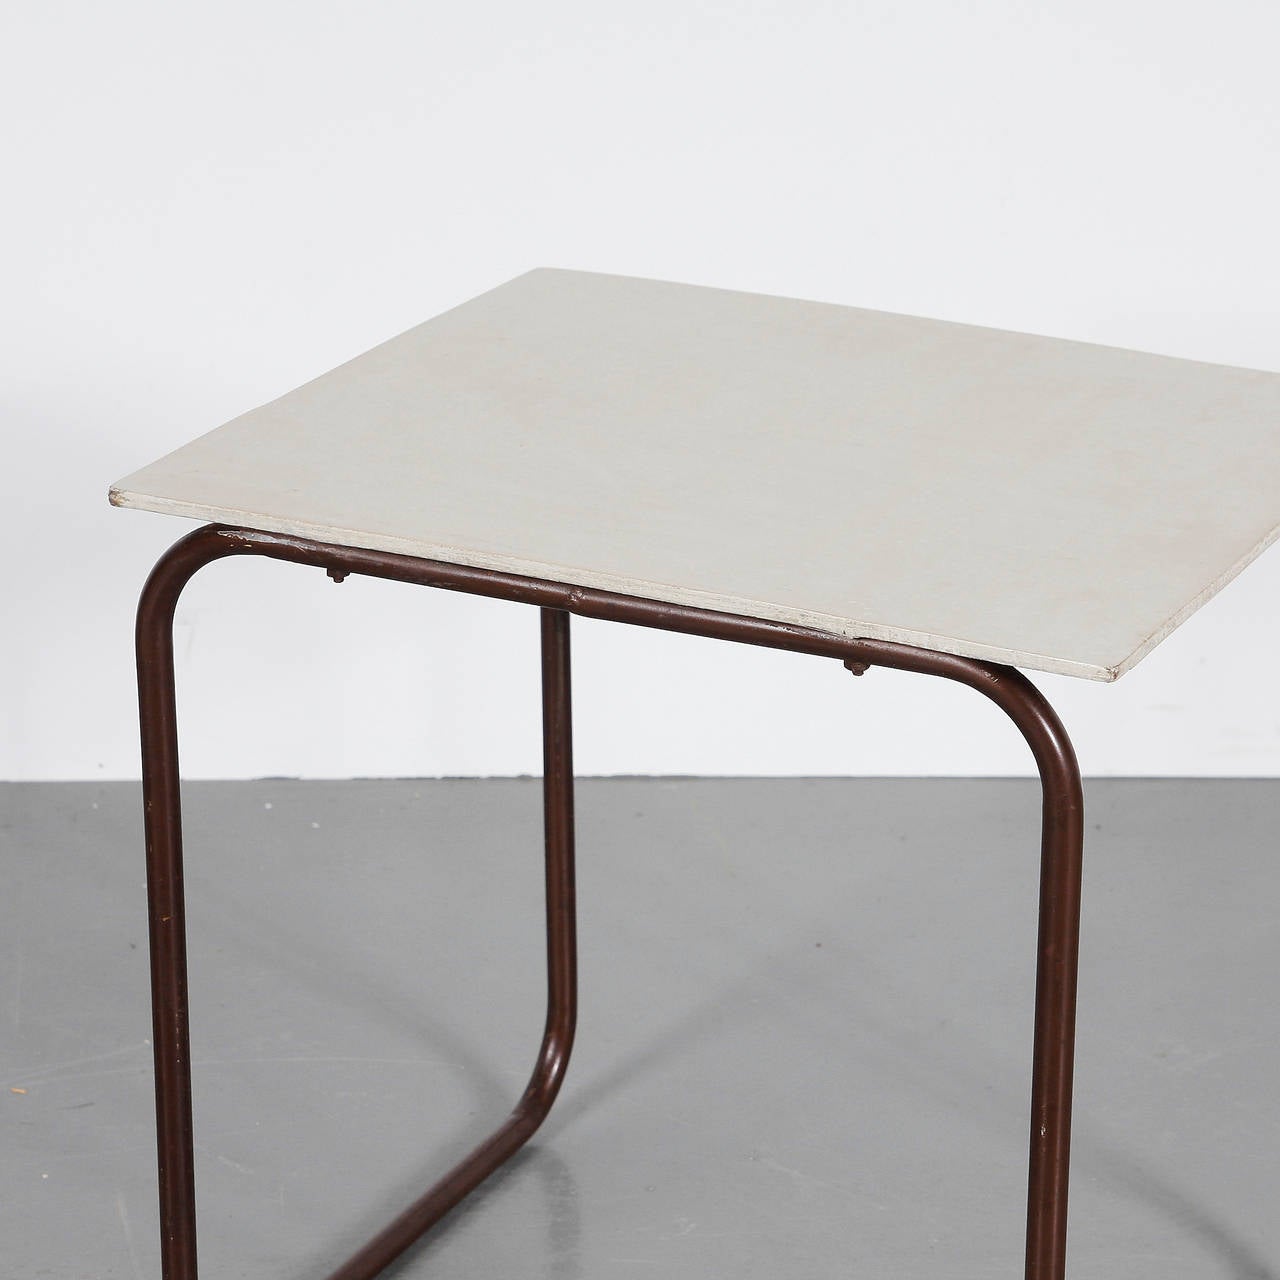 Lacquered Modernist Dutch Side Table, circa 1950